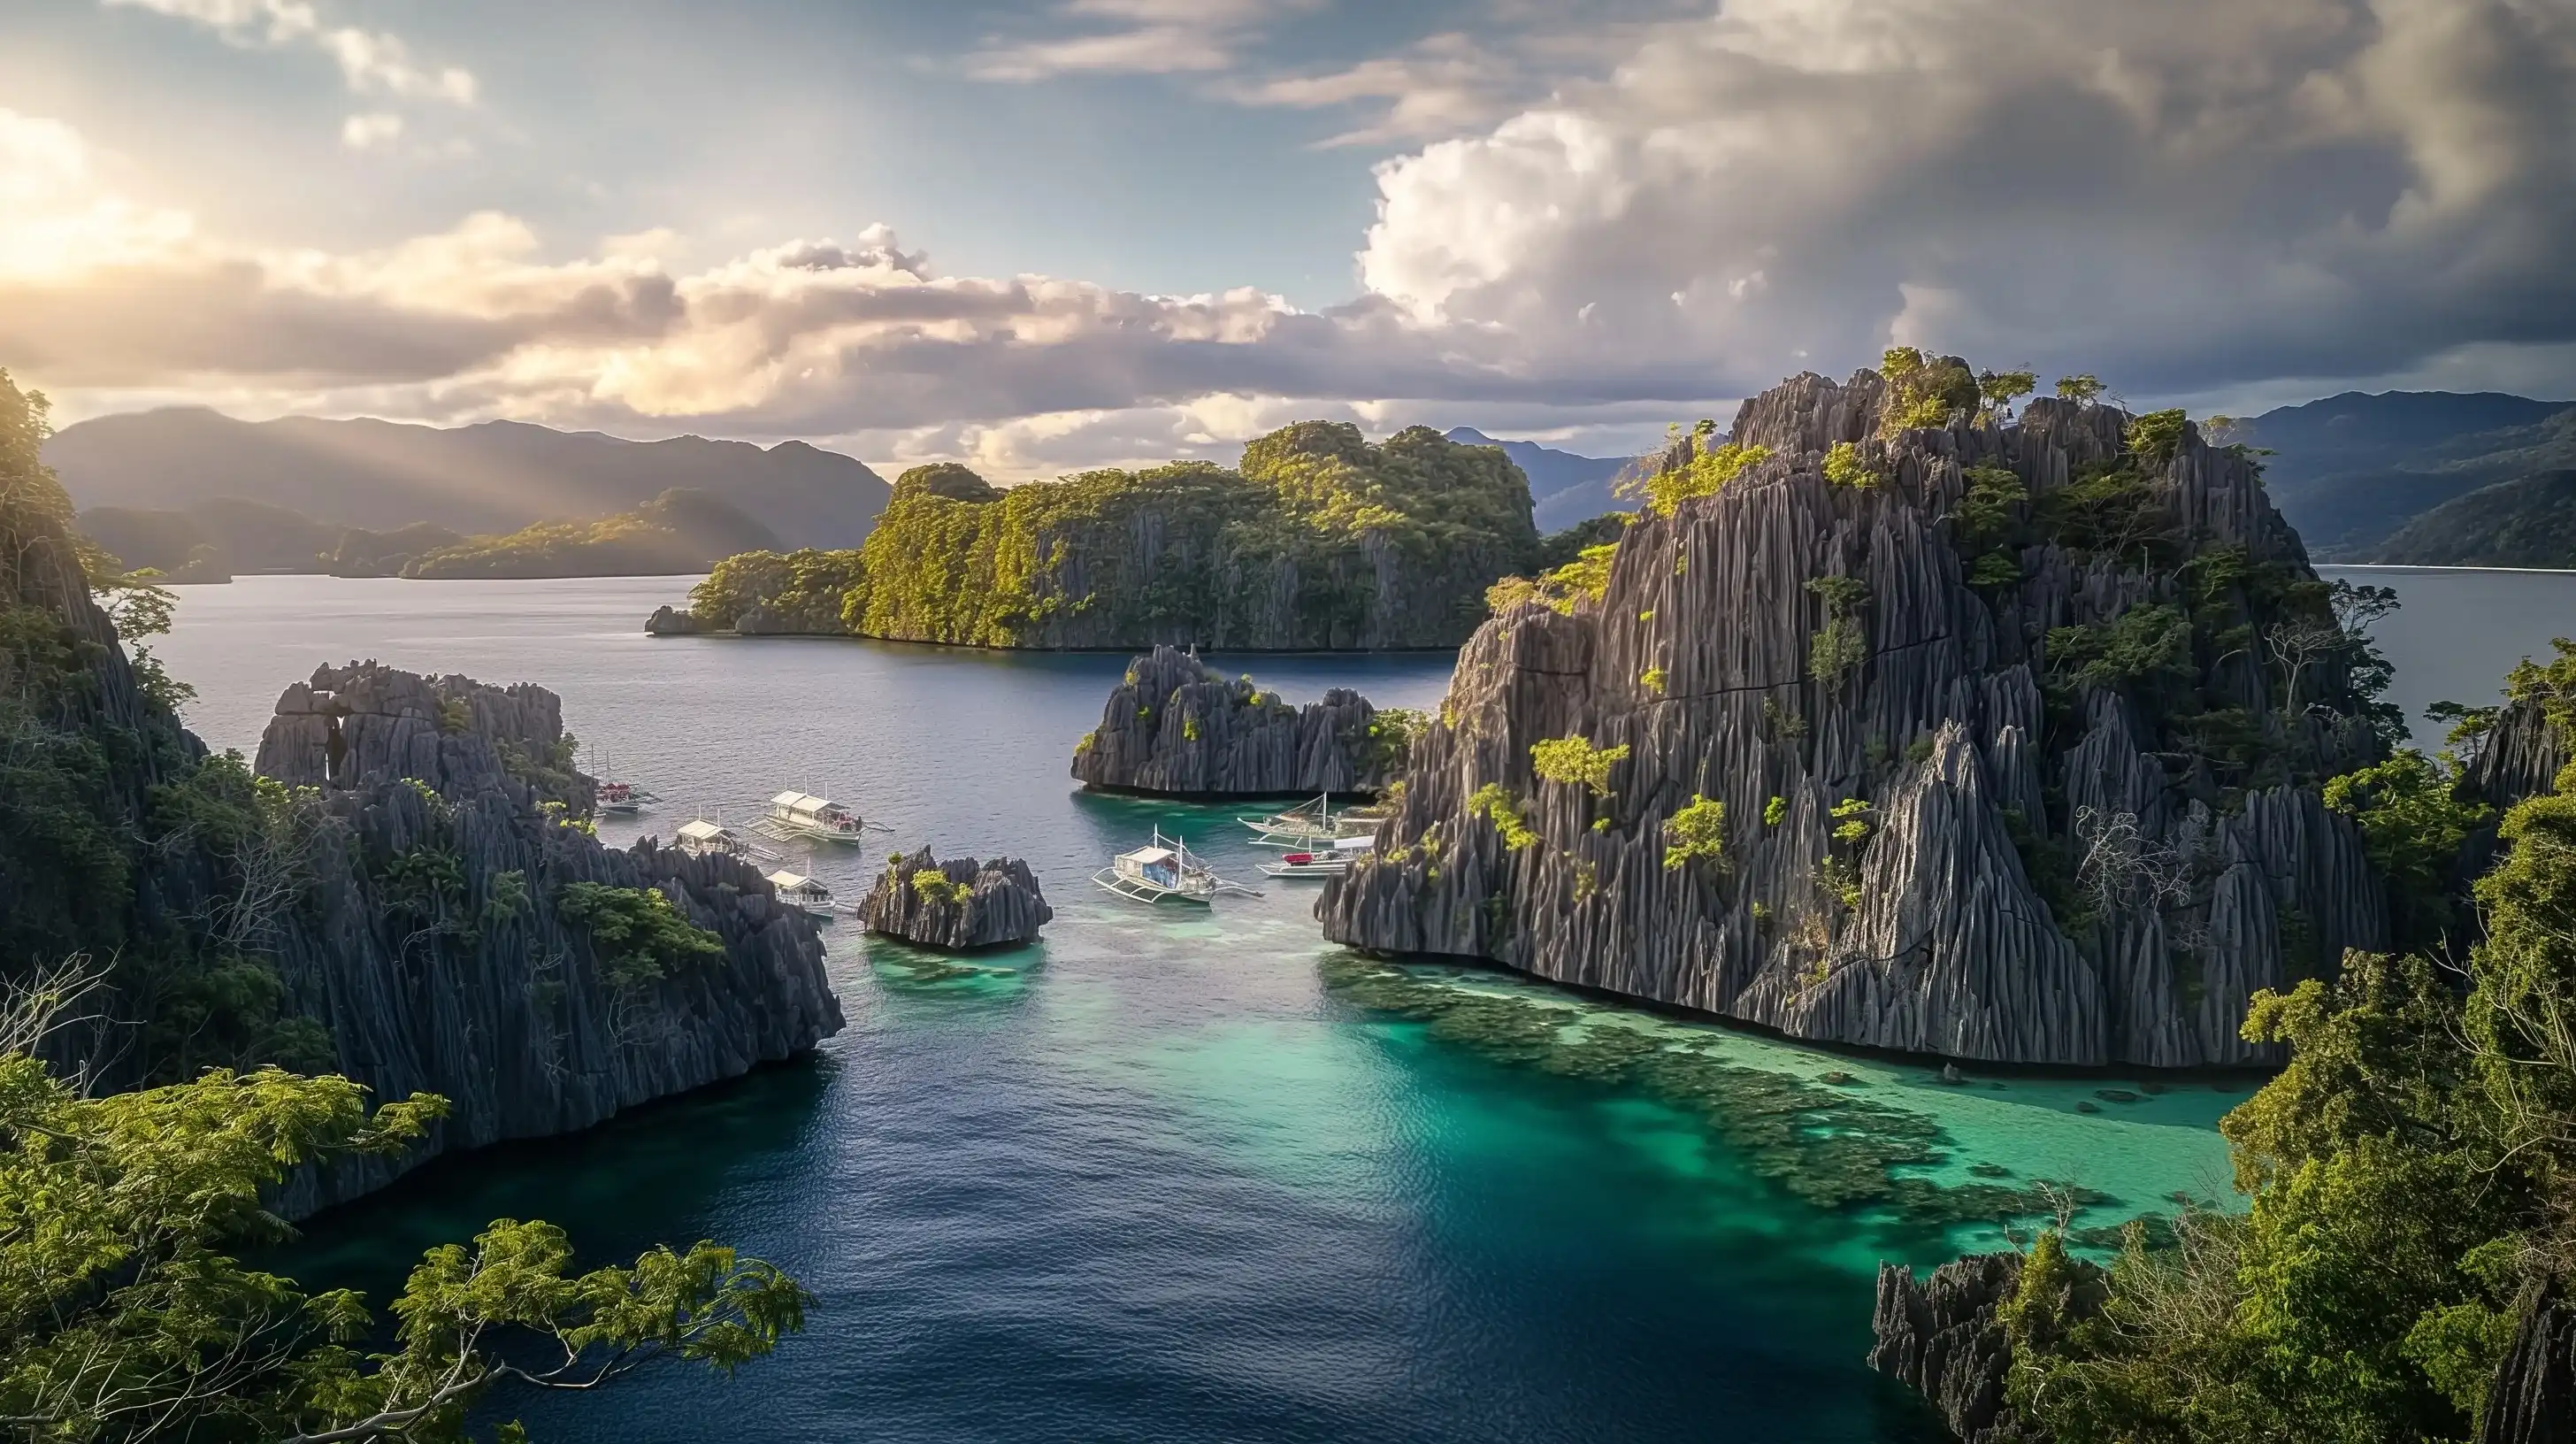 Coron El Nido Palawan Philippines Tropical Paradise Clear Blue Waters and Limestone Cliffs south east asia landscape